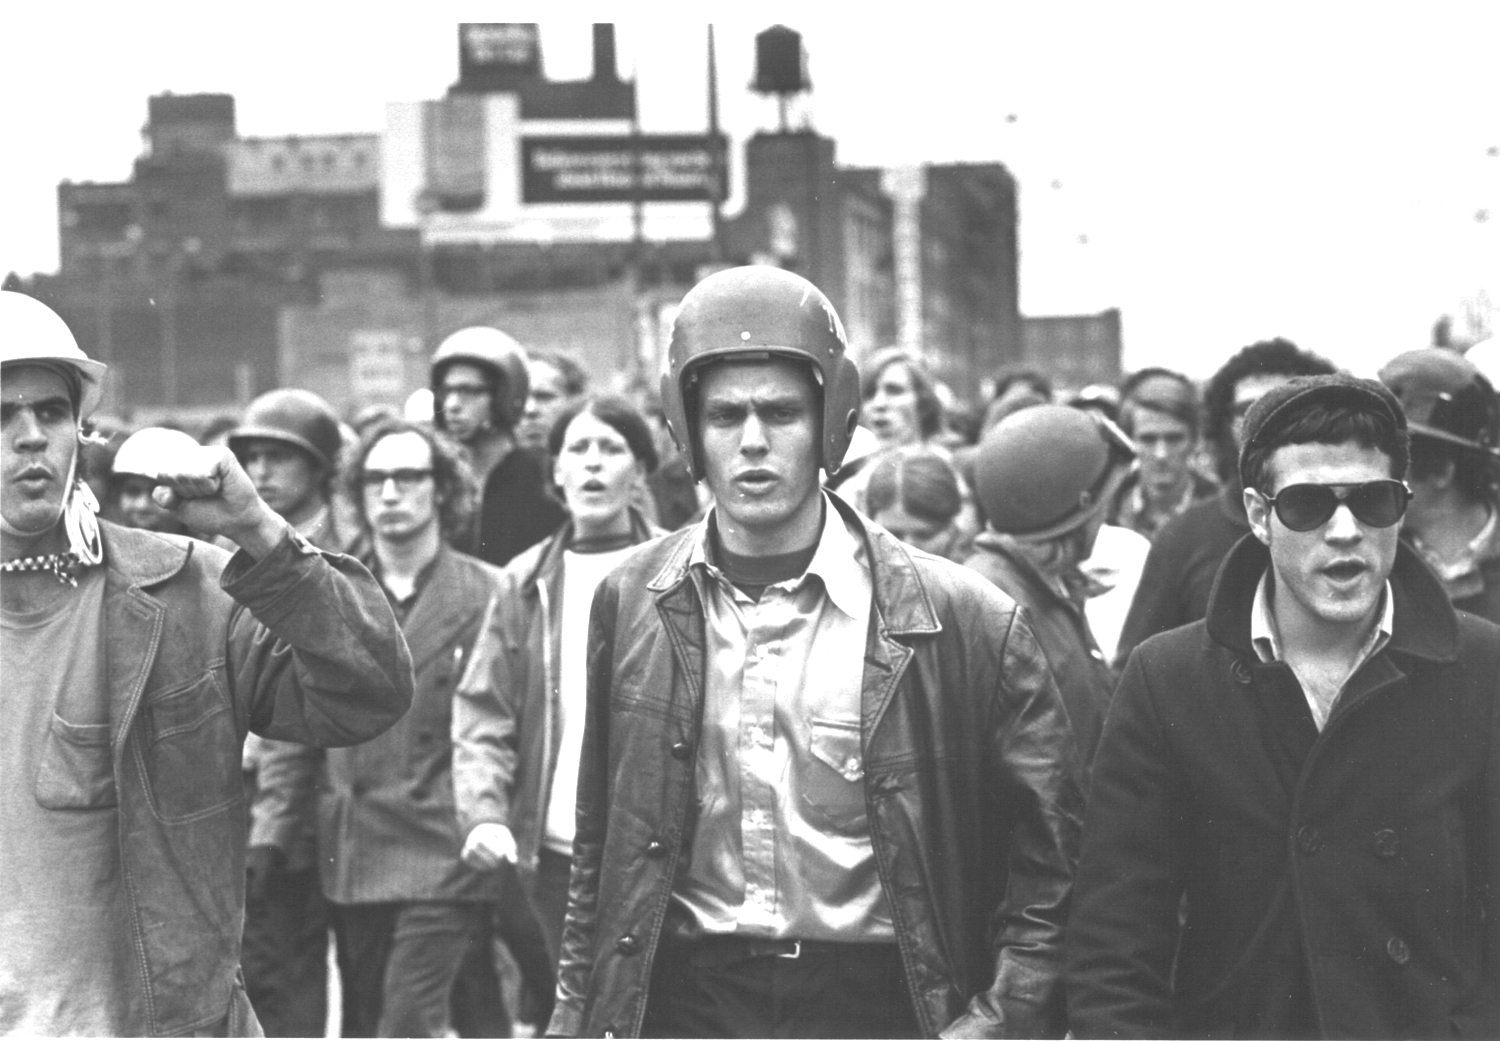 John Jacobs (l) and Terry Robbins (r) at the Days of Rage, Chicago, October 1969. Their group, the Weathermen, were a conspicuous domestic terrorism problem in the early 1970s. (Photo: David Fenton, ITV)